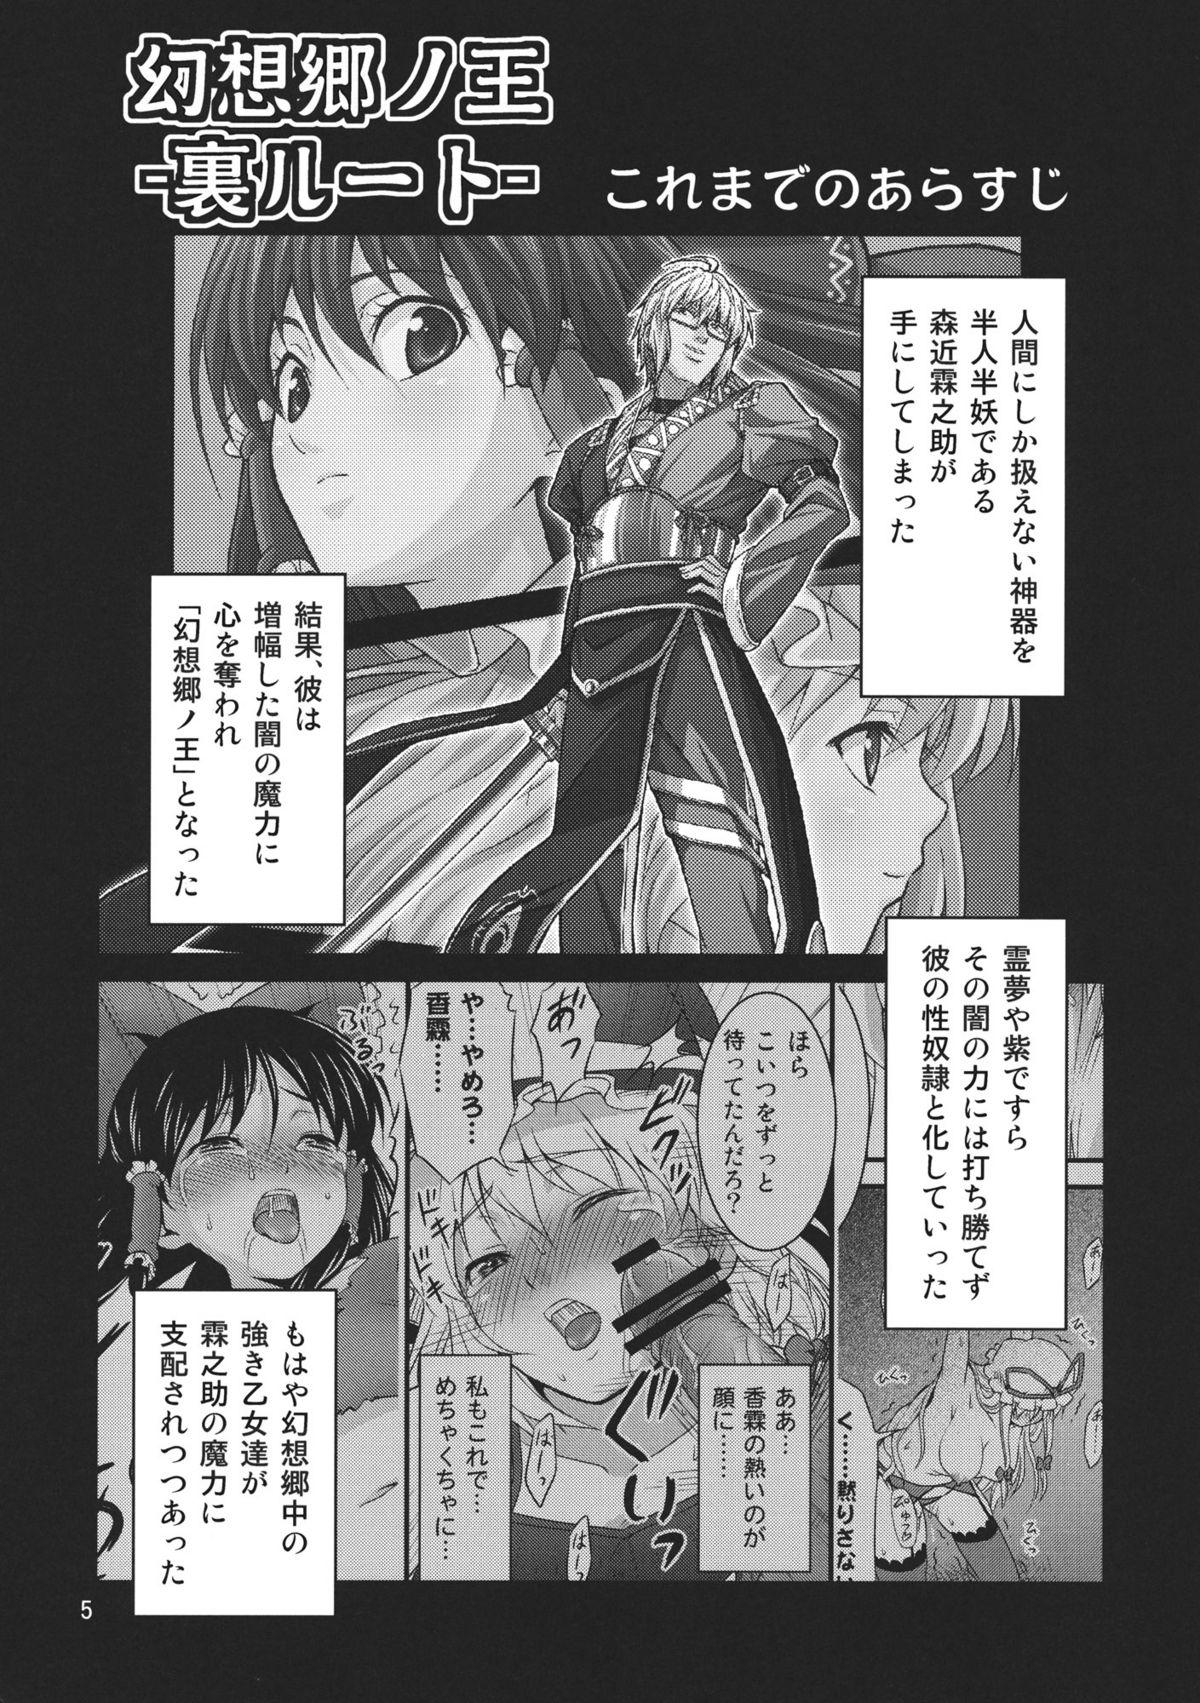 Scissoring Gensoukyou no Ou - Touhou project Girl On Girl - Page 5